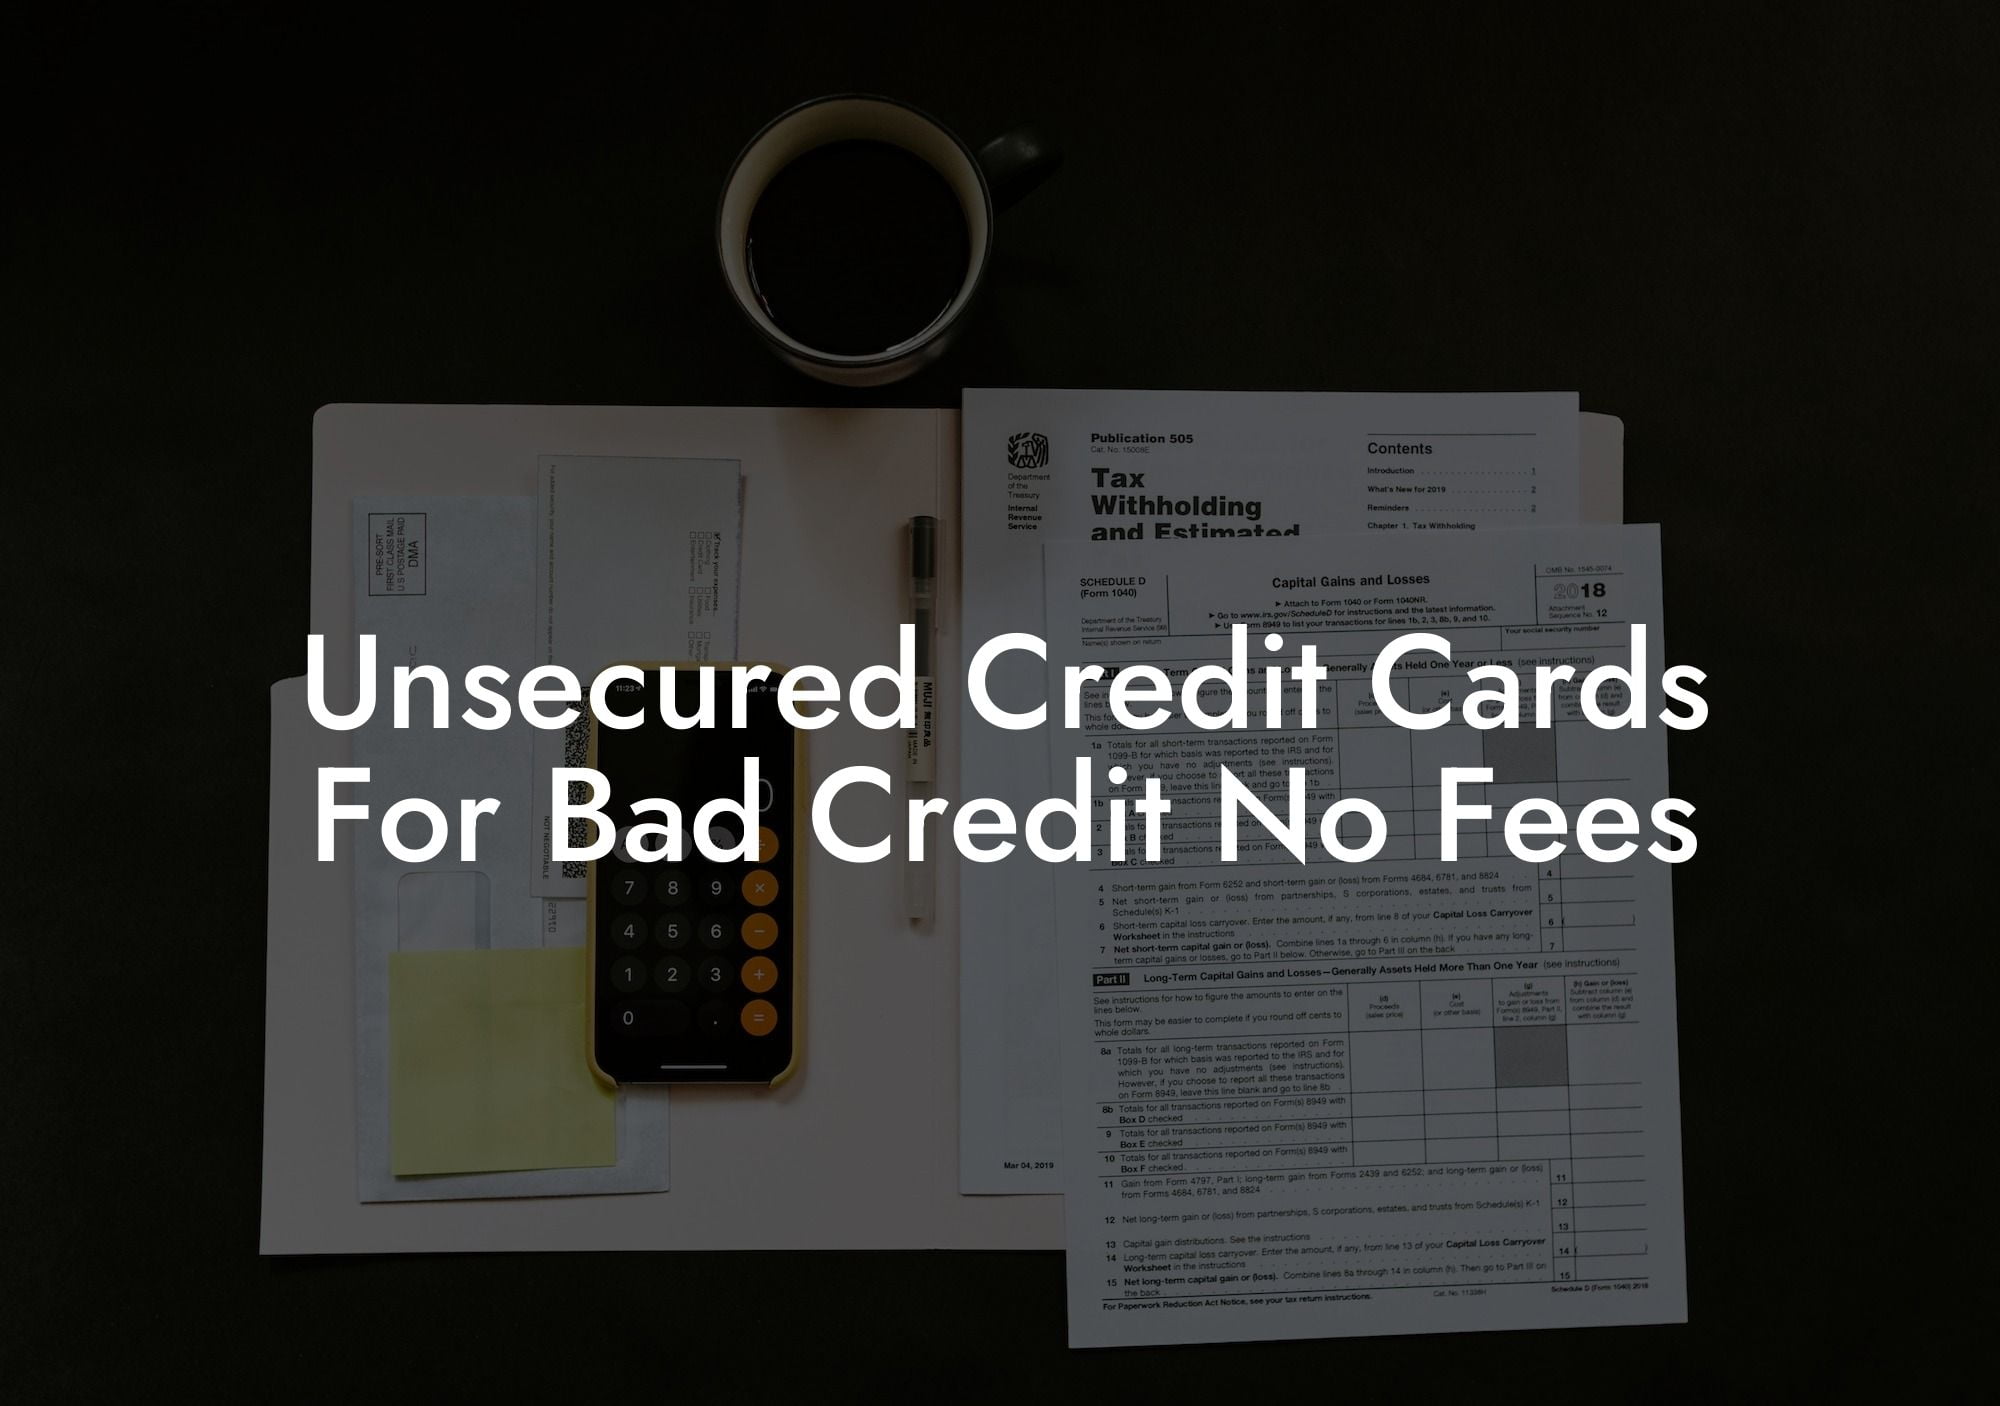 Unsecured Credit Cards For Bad Credit No Fees